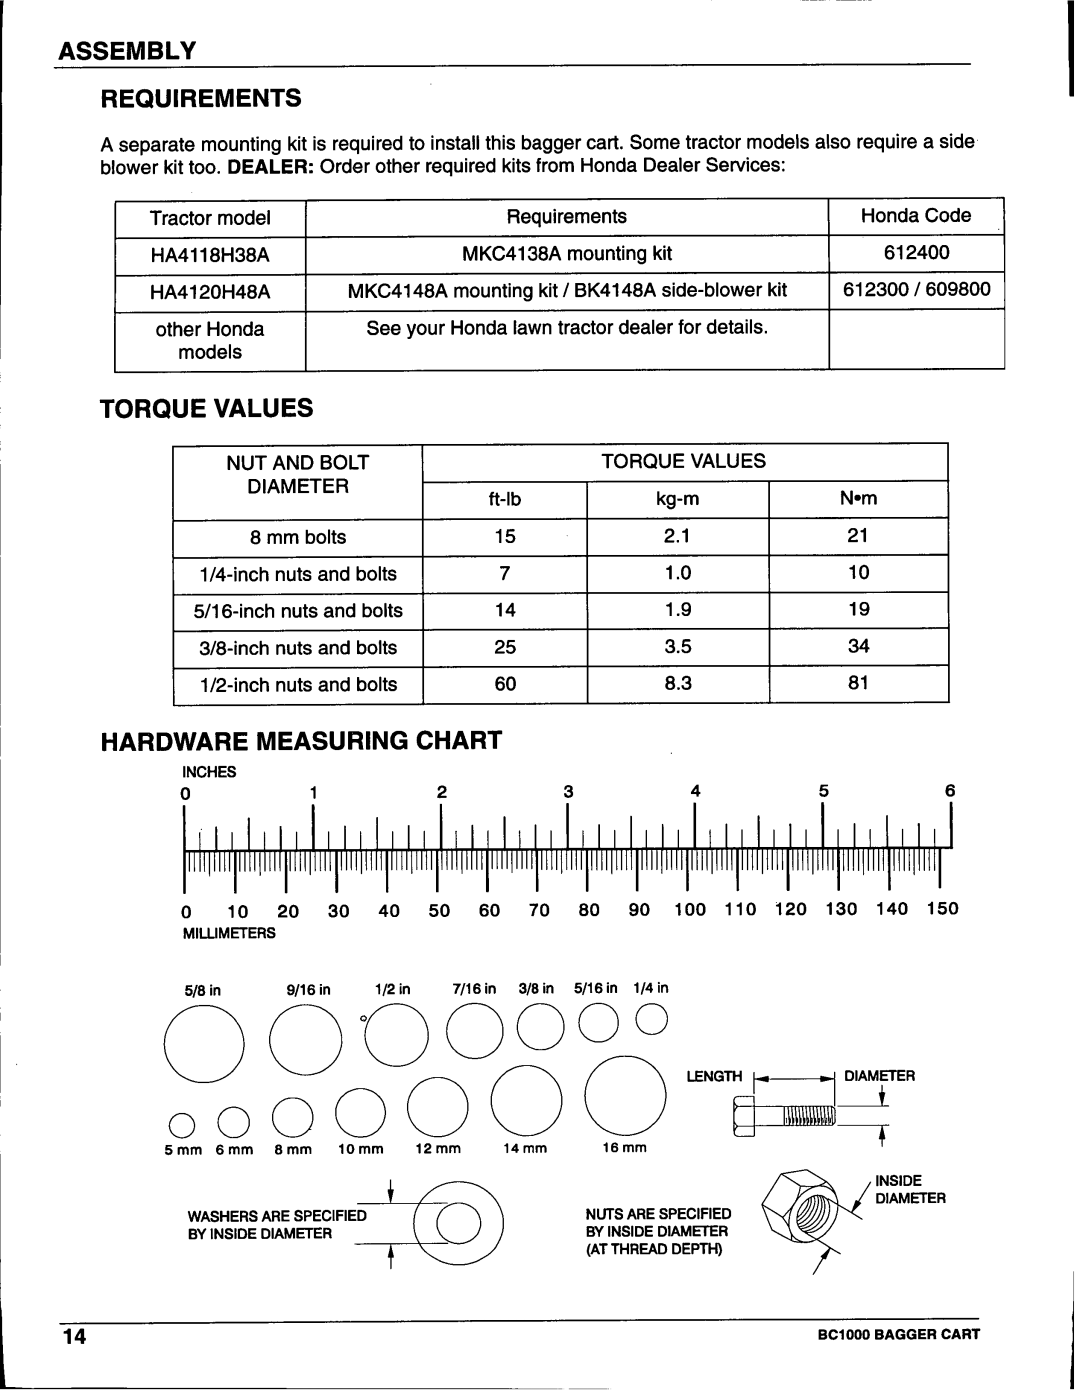 Honda Power Equipment BC100 manual Assembly Requirements, Hardware, Chart, Torque, Measuring, Values 